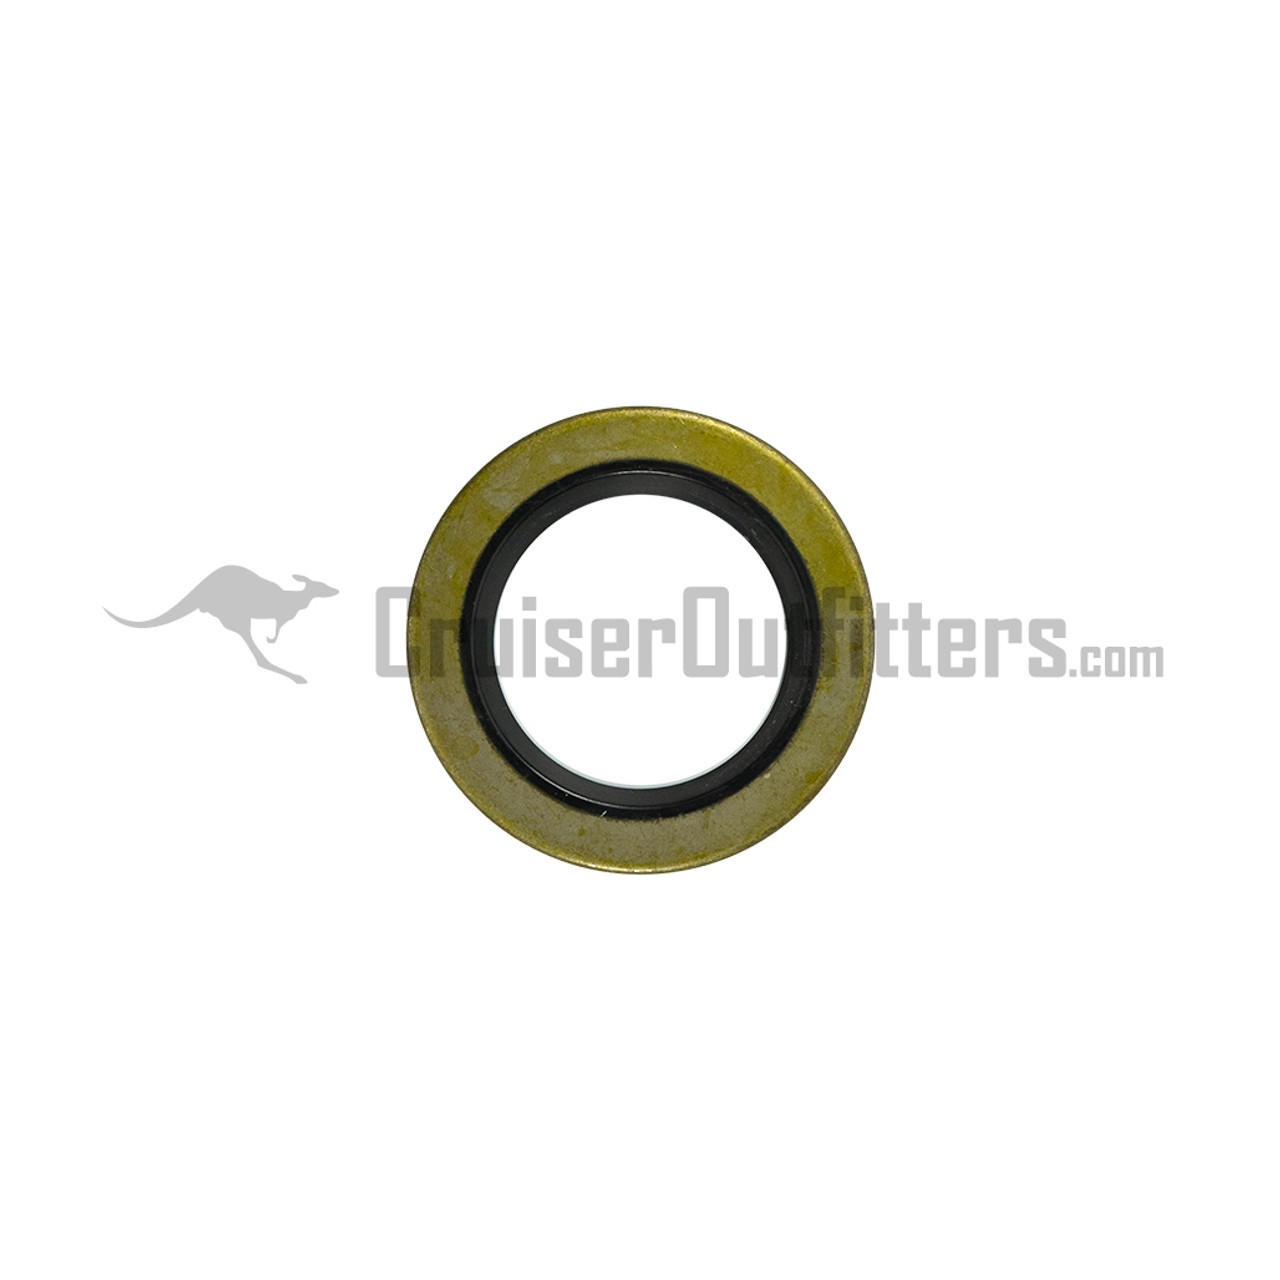 Rear Axle Seal - Japanese - Fits 1969 - 8/1973 FJ40/55 (Semi-Float Axle - One Required per Side) (RS47029)